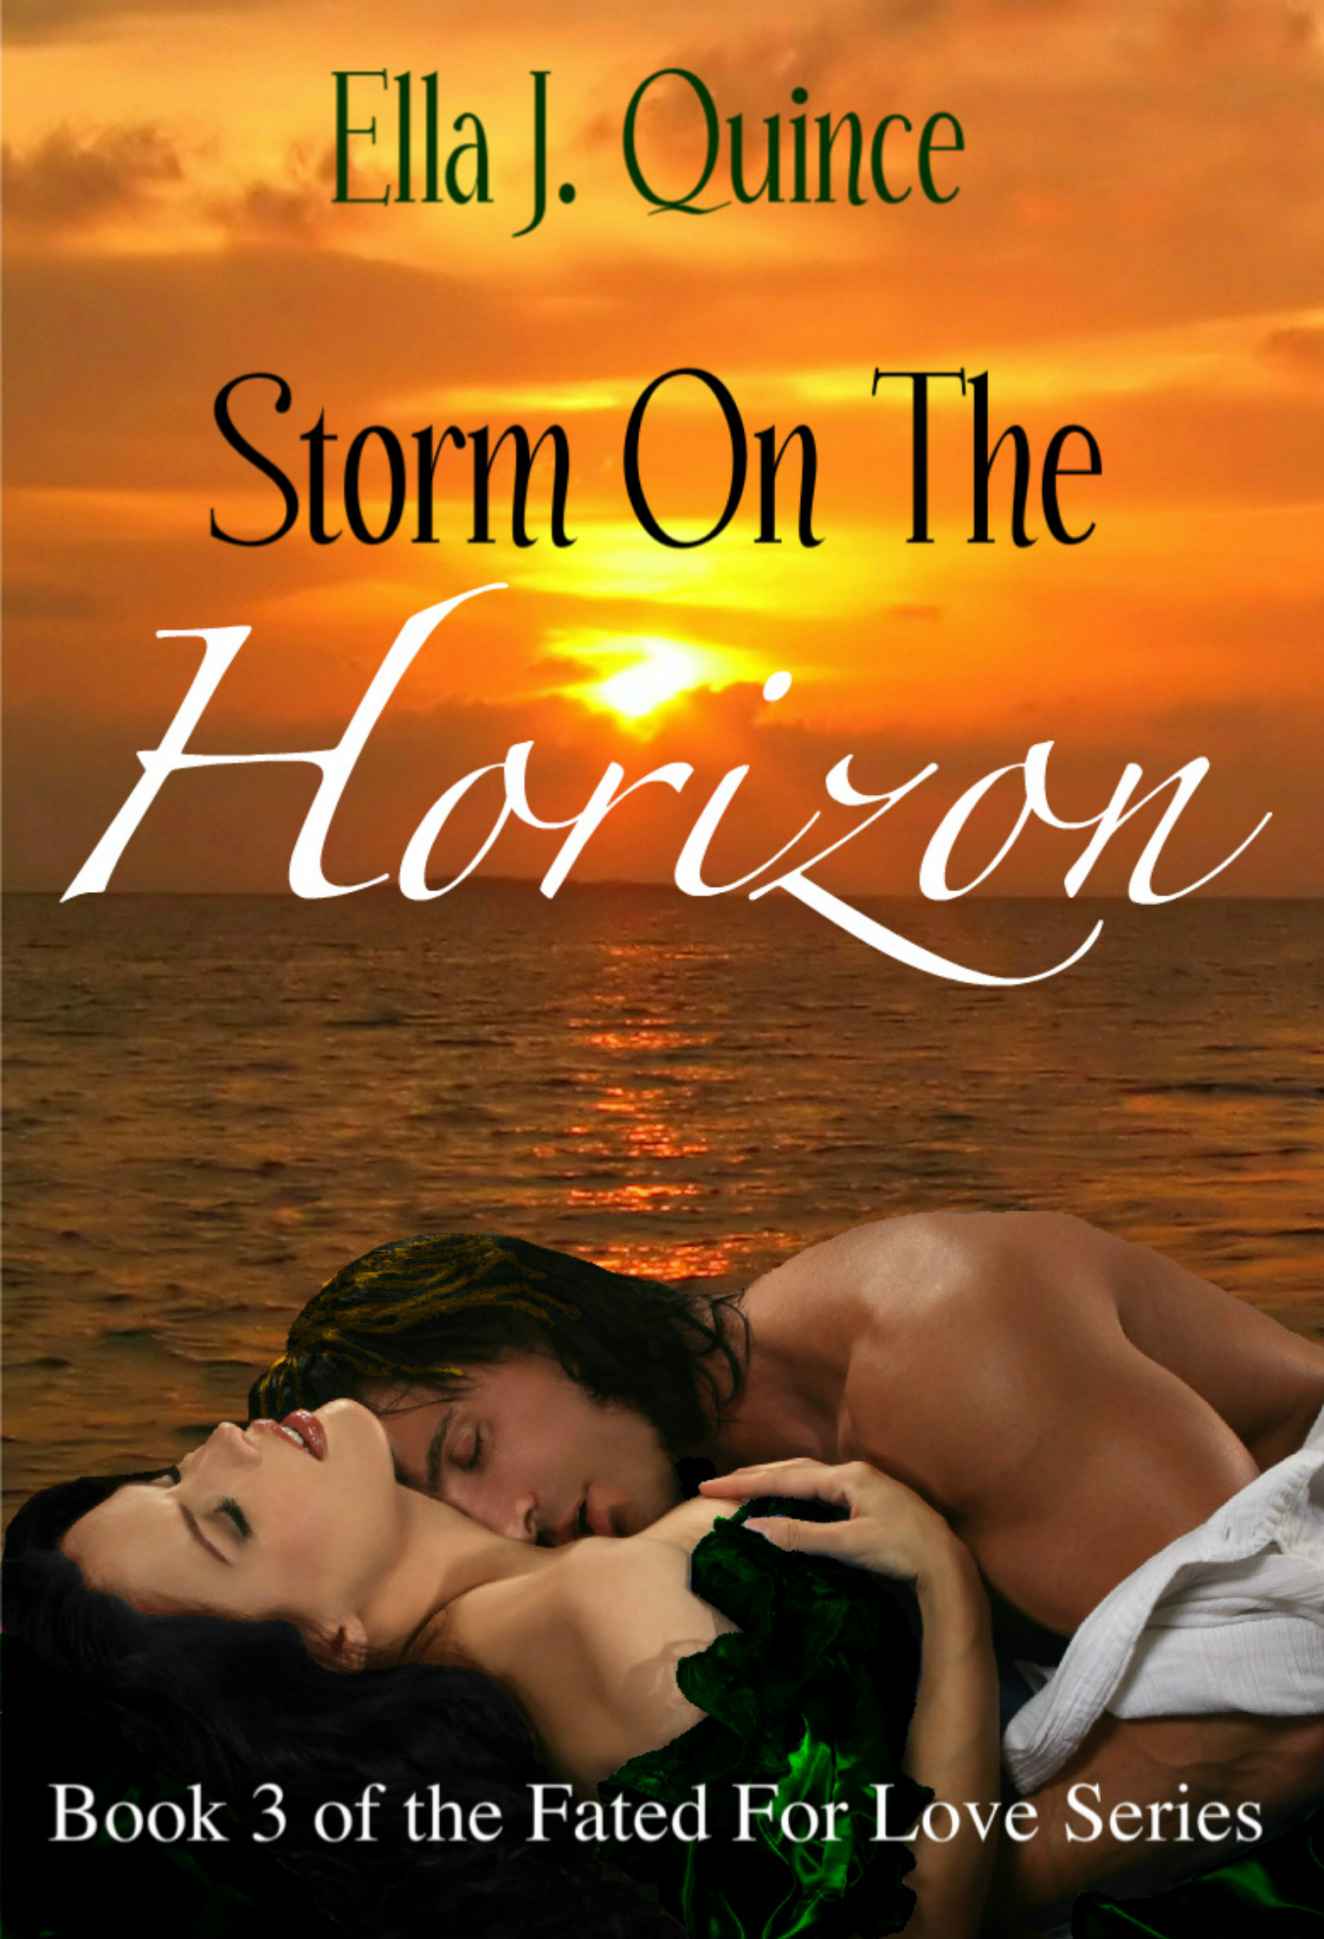 Storm on the Horizon (Fated For Love) by Ella J. Quince